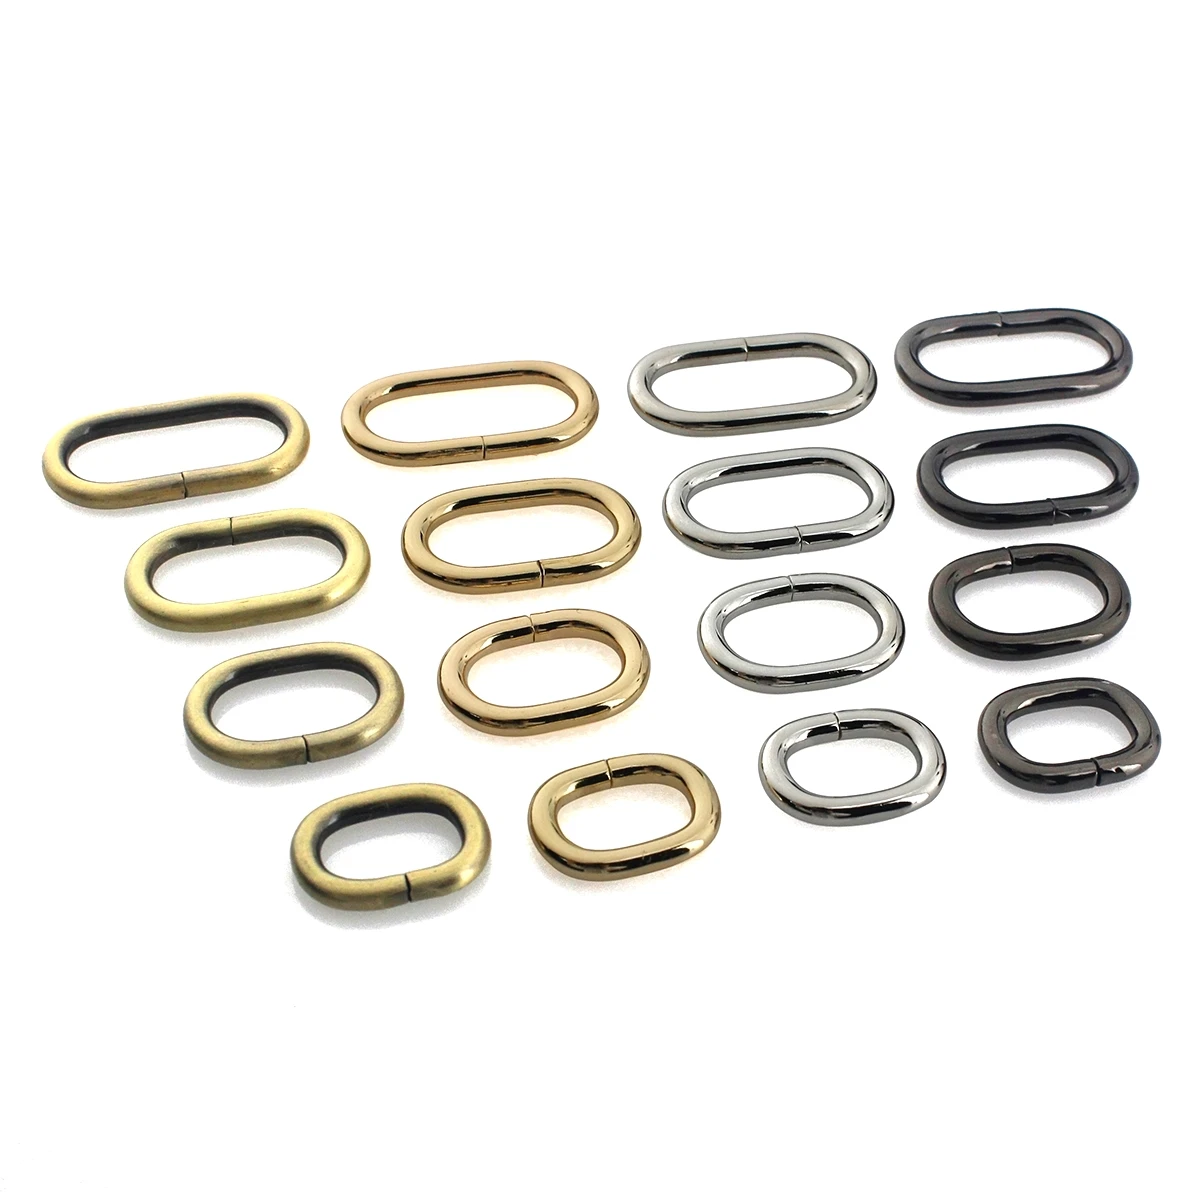 1pcs Metal Oval ring Buckle Loops for Webbing Leather Craft Bag Strap Belt Buckle Garment DIY Accessory 20/25/31/38/50mm